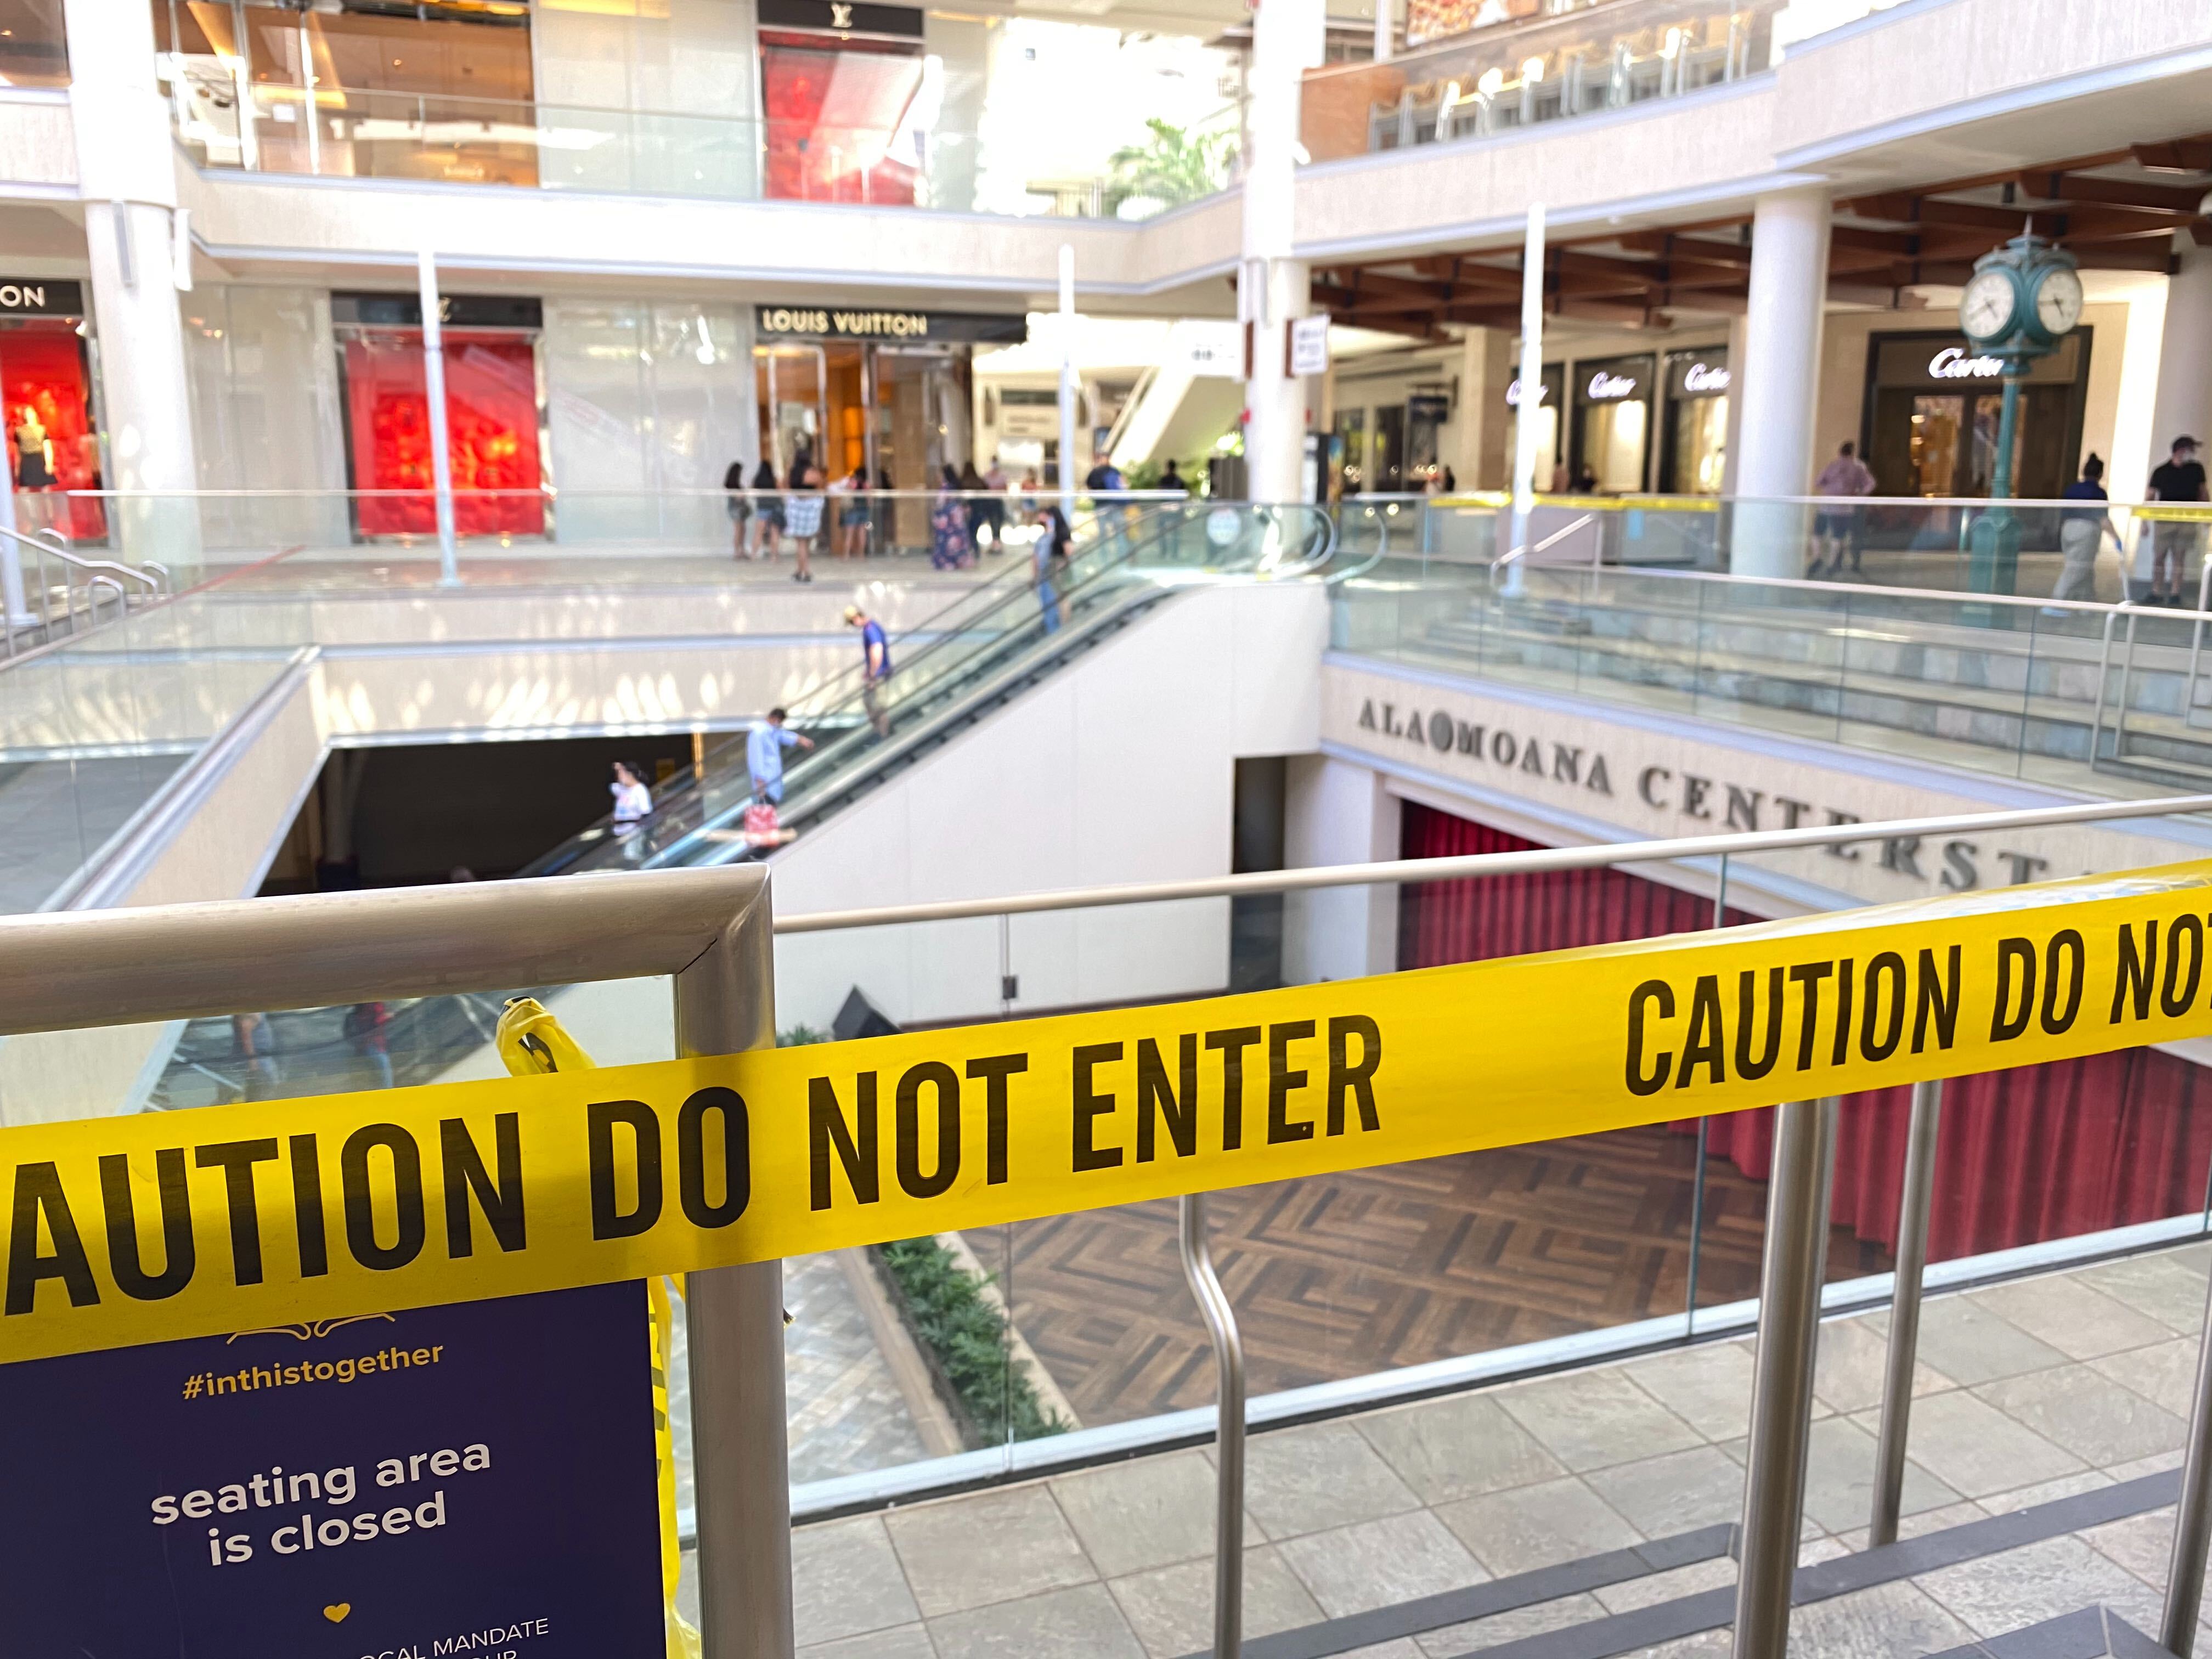 Ala Moana Center is open, but it's hardly business as usual